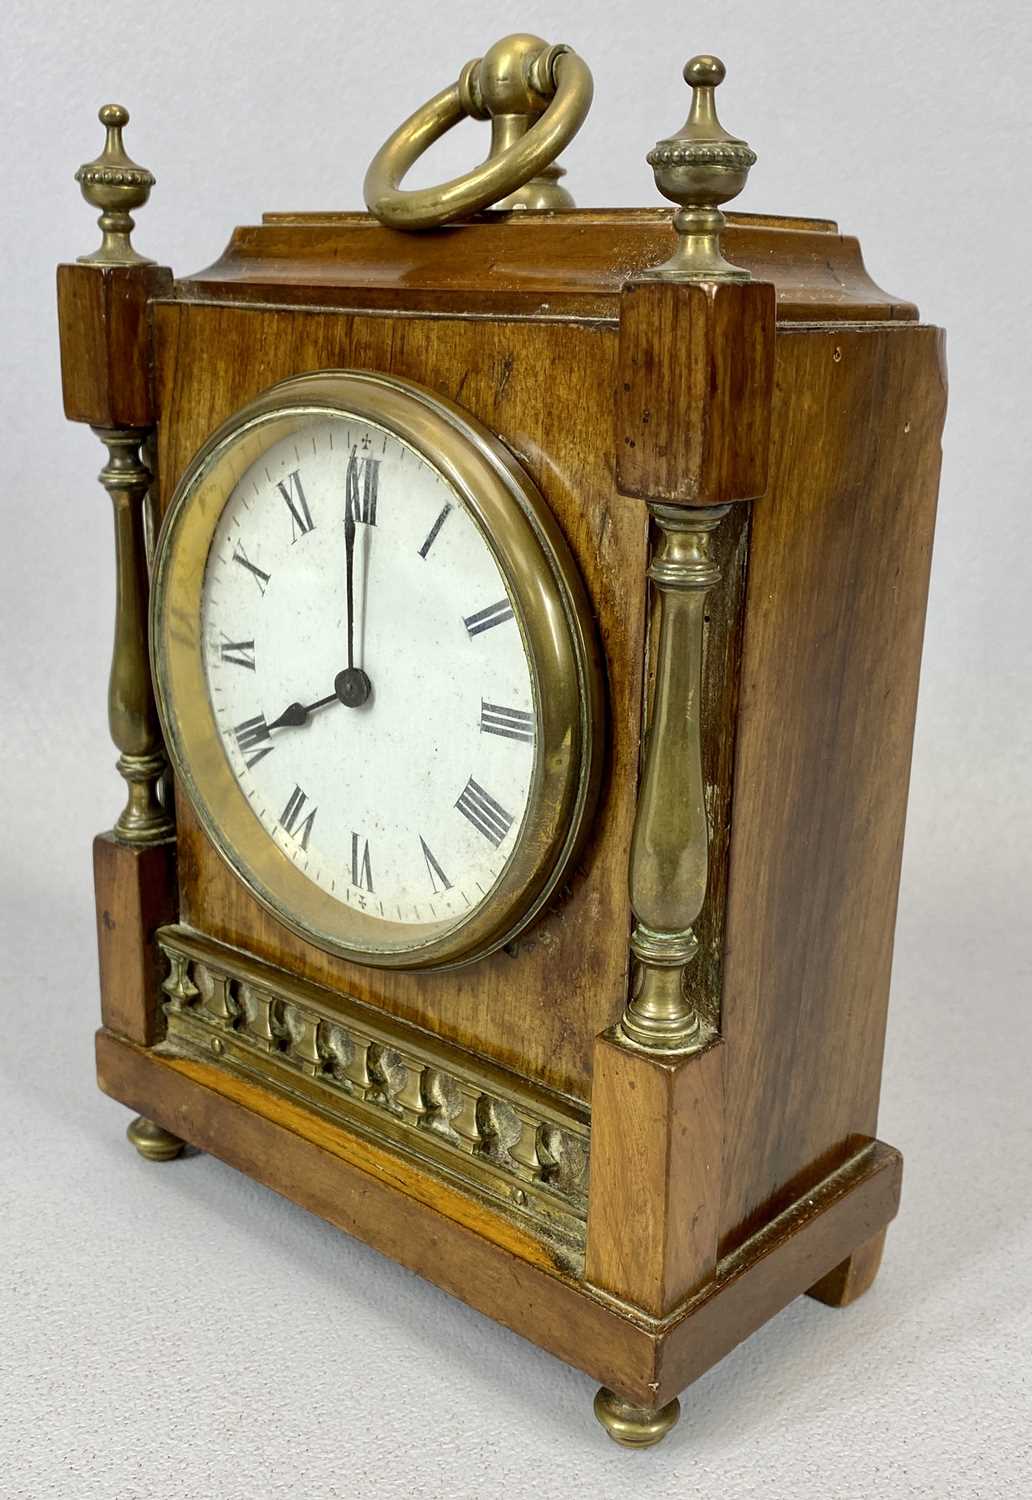 LATE VICTORIAN ORNATE BRASS MOUNTED WALNUT MANTEL CLOCK, with white enamel dial Provenance: - Image 3 of 5